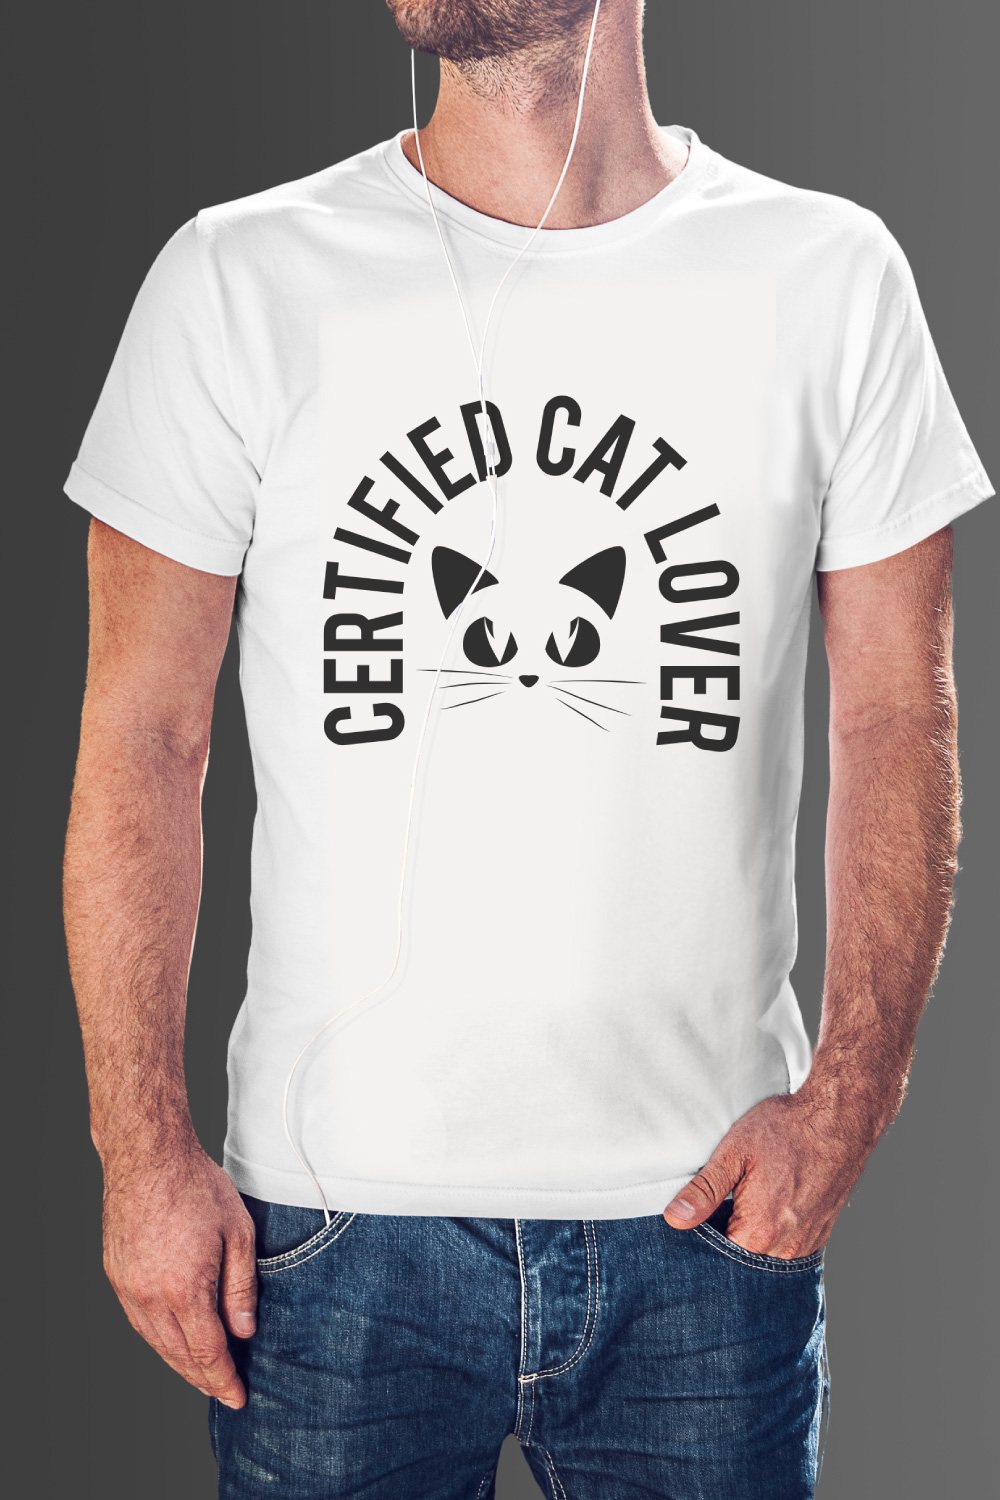 Certified cat lover tshirt design pinterest preview image.